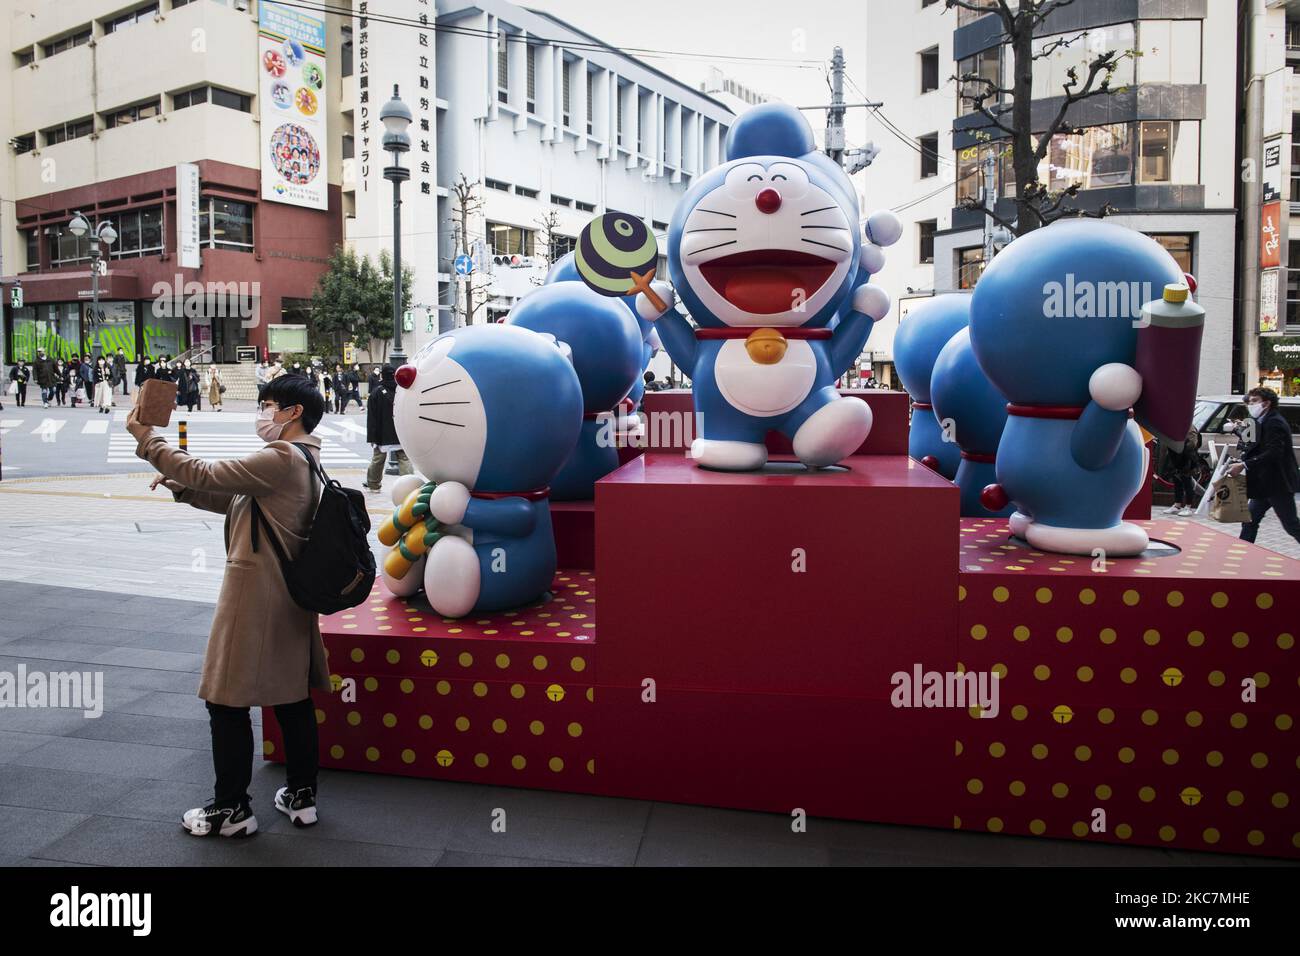 Man wearing a protective face mask takes his selfie with exhibit of cartoon characters at the shopping district in Tokyo, Japan on 16 January 2021. (Photo by Yusuke Harada/NurPhoto) Stock Photo